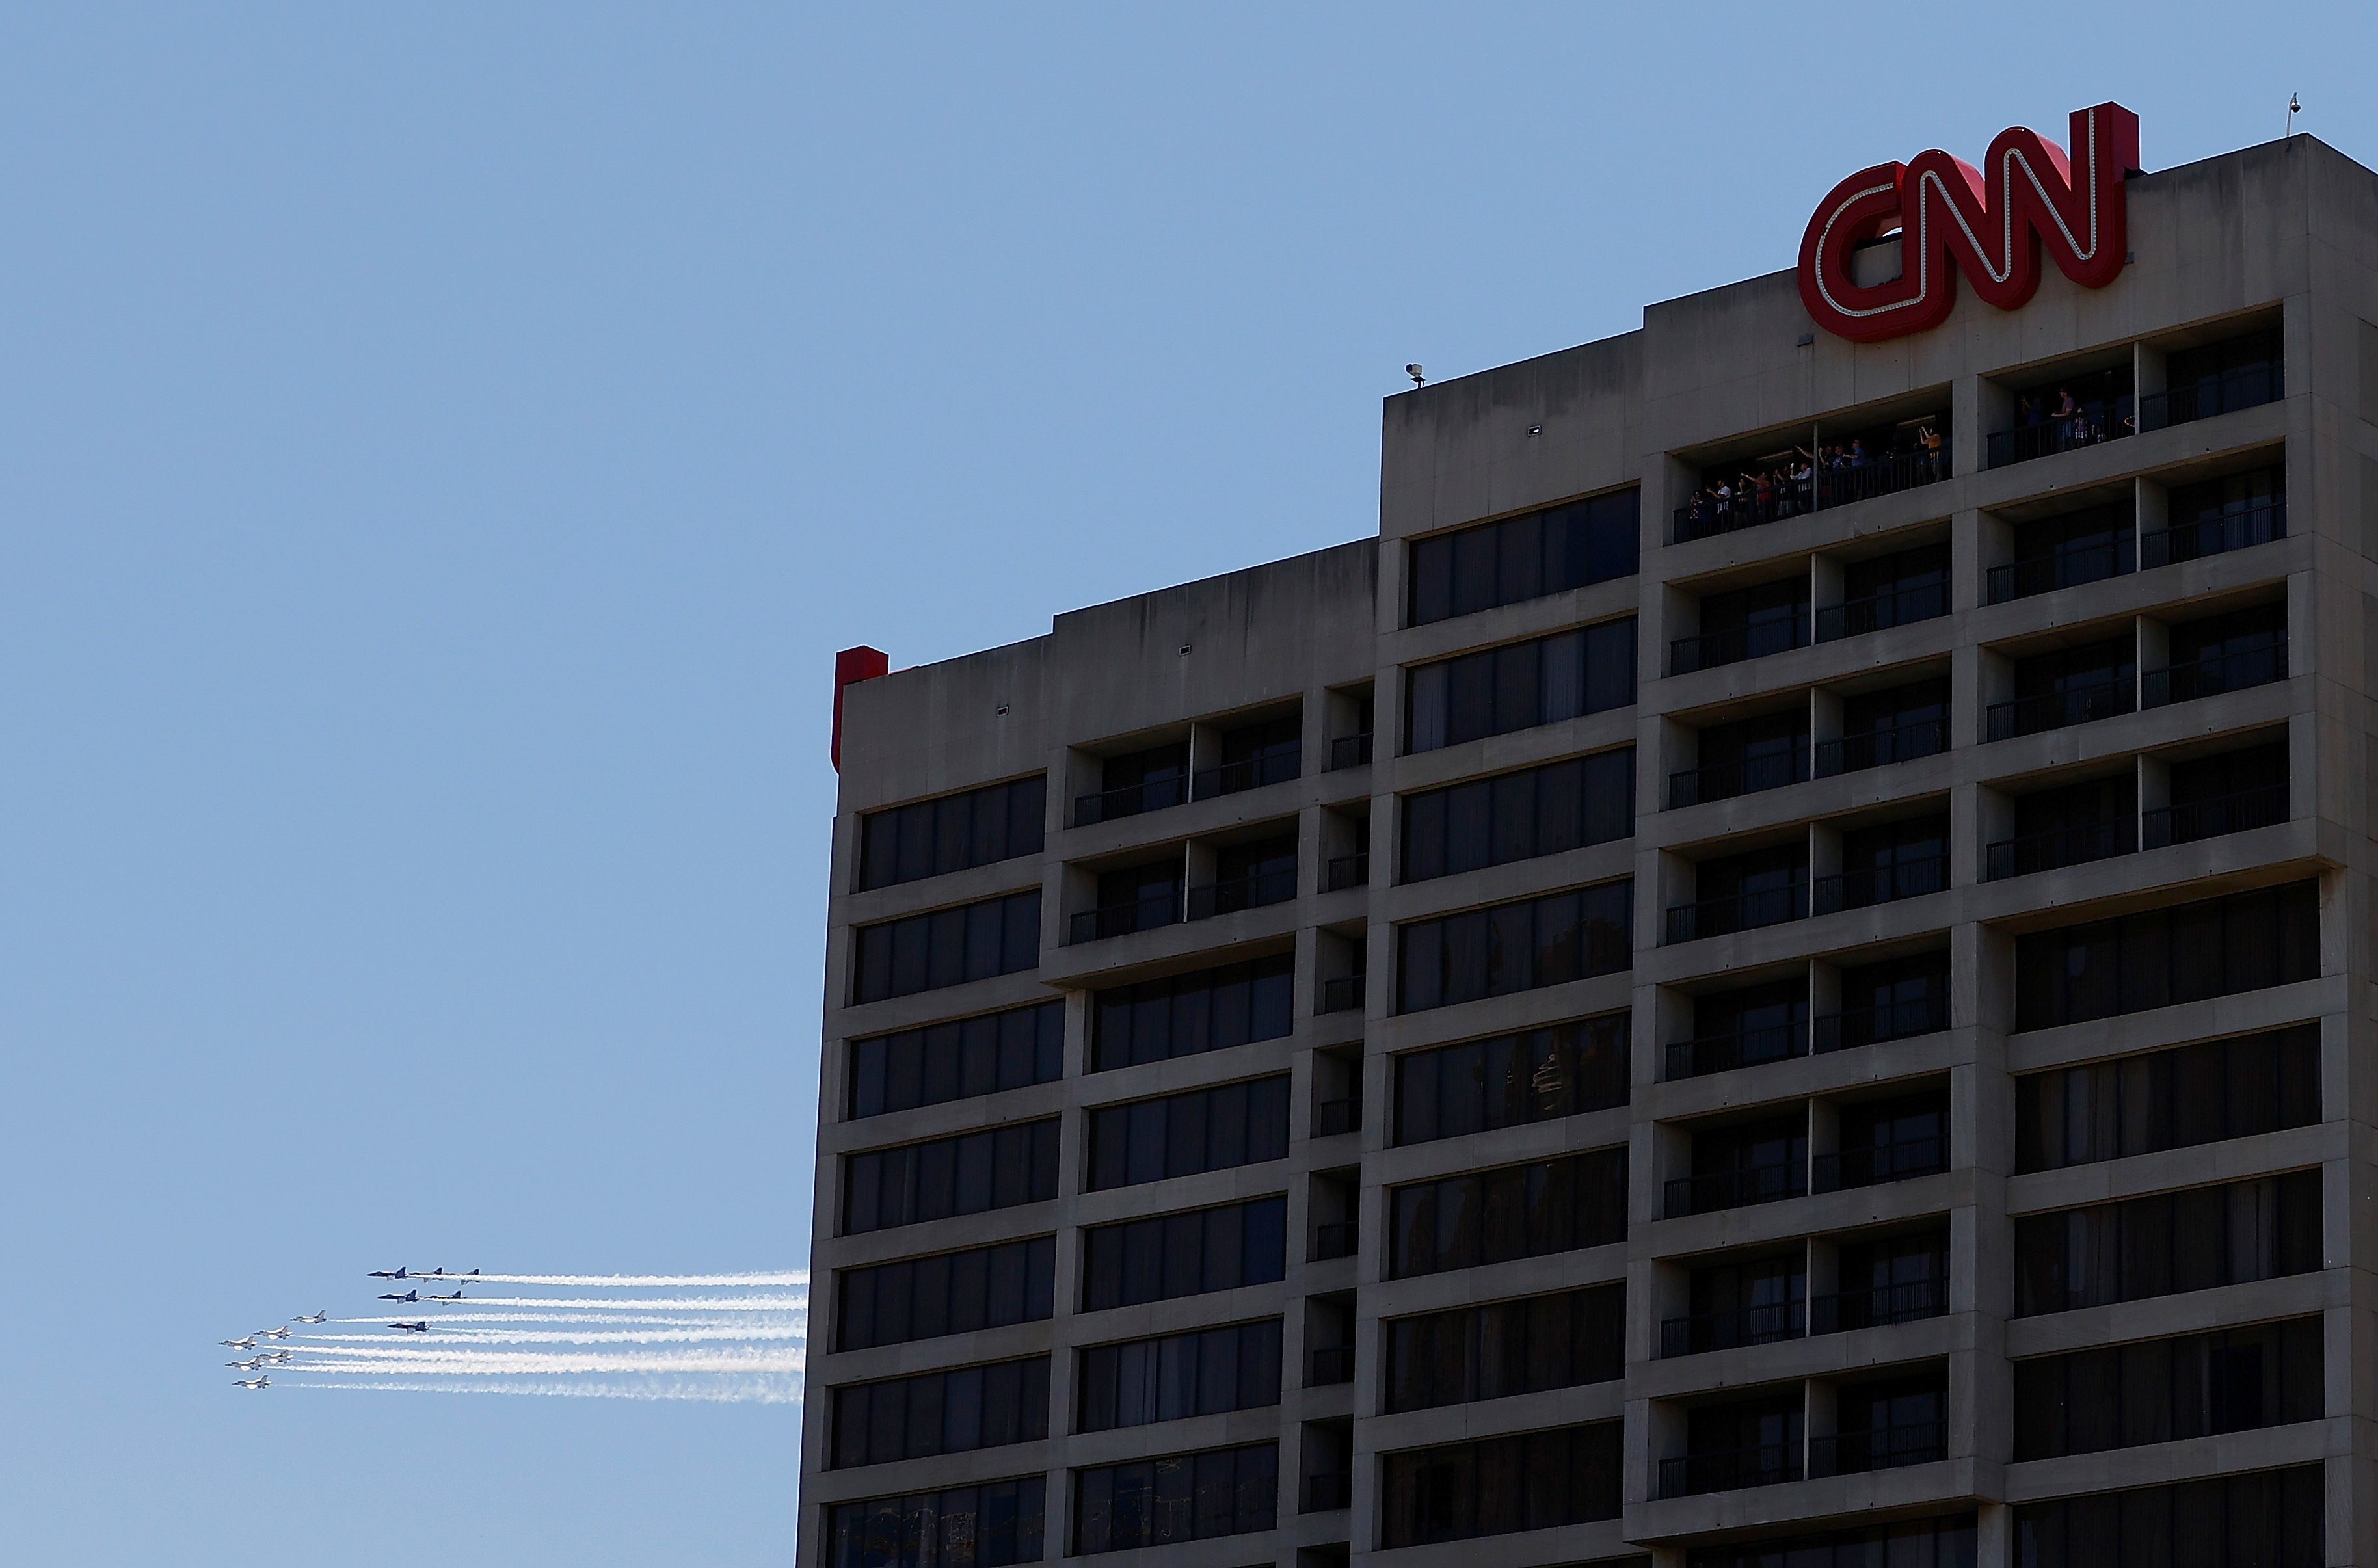 In this image, the Blue Angles fly past the CNN headquarters